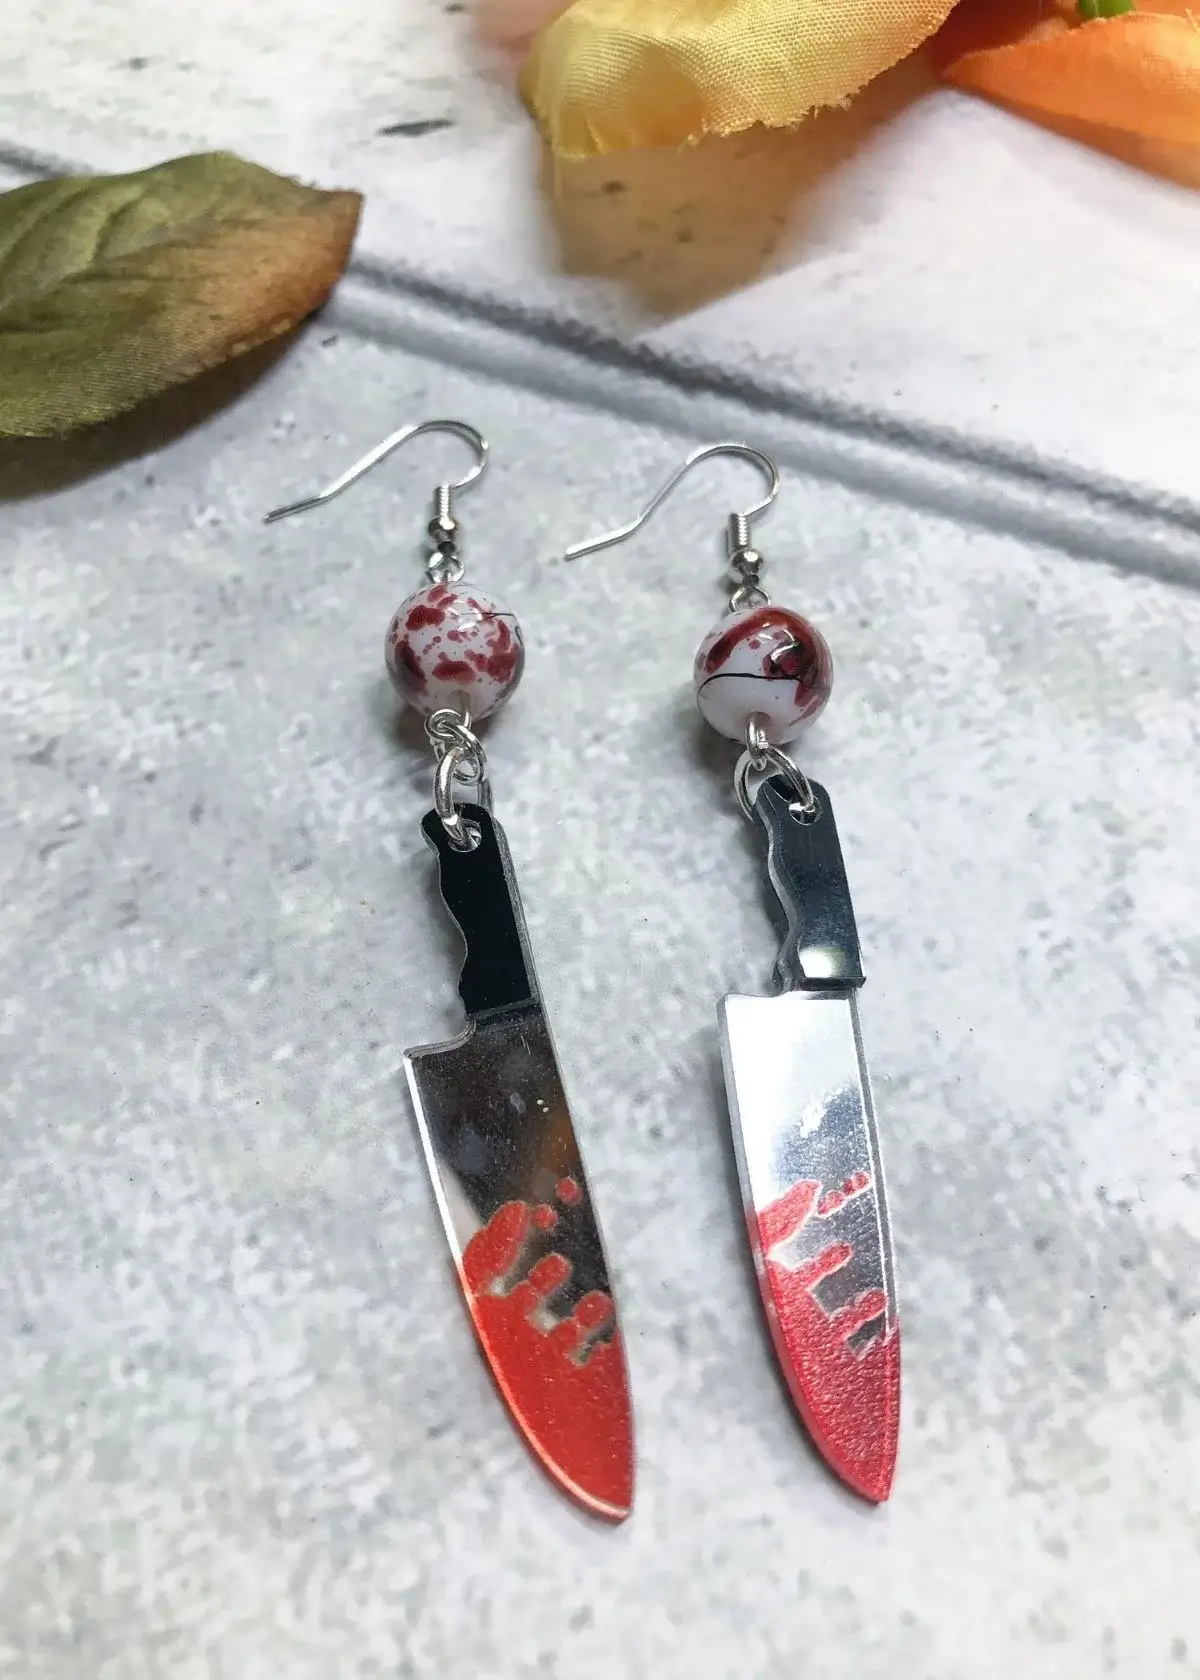 How to choose the right knife earrings?